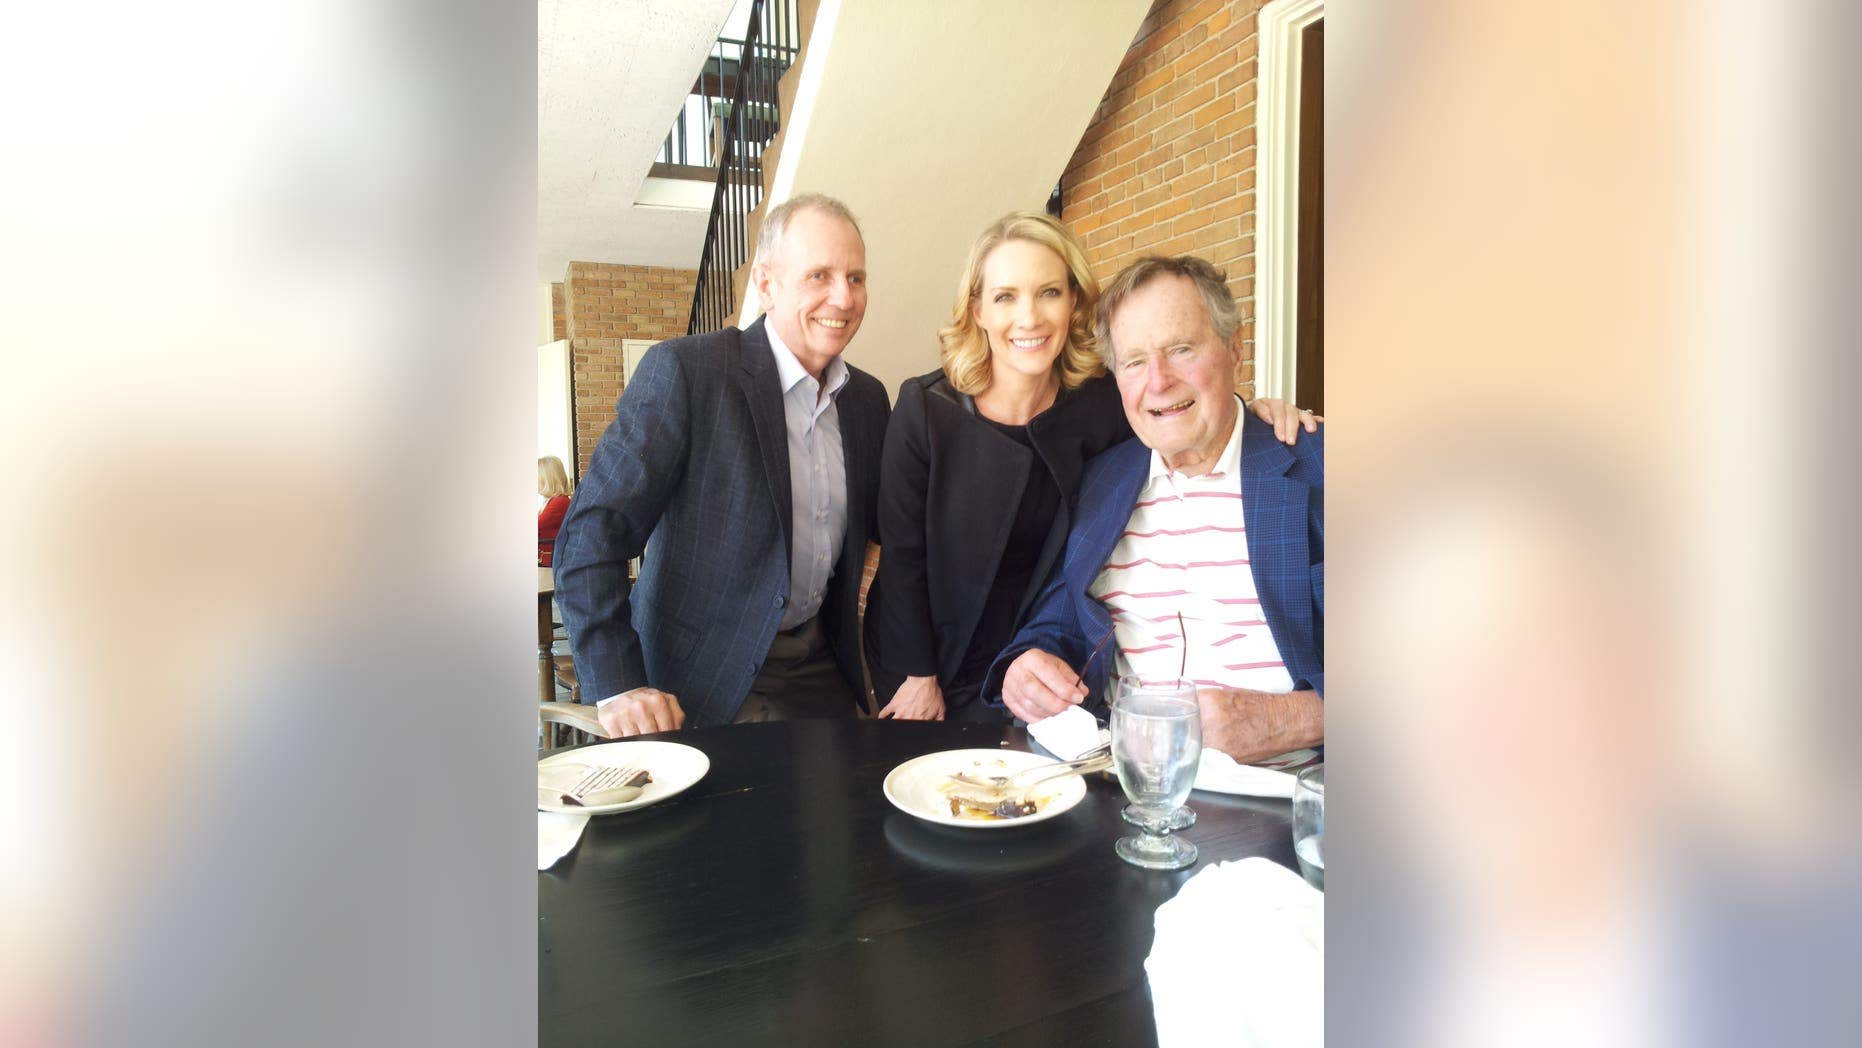 Dana Perino: Remembering George H.W. Bush by recognizing a woman who is a true ‘Point of Light’